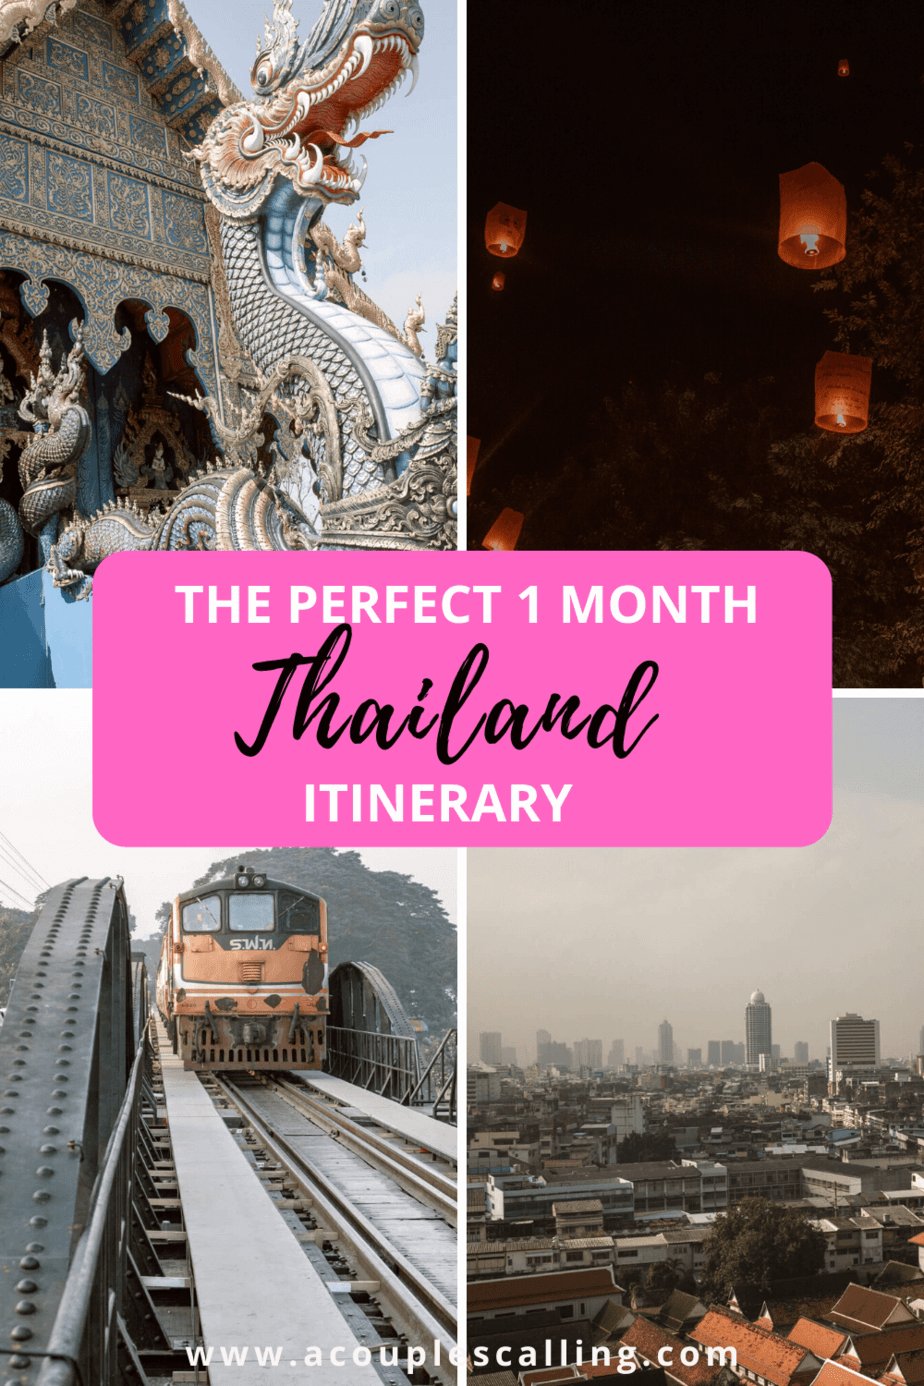 1 month Thailand itinerary